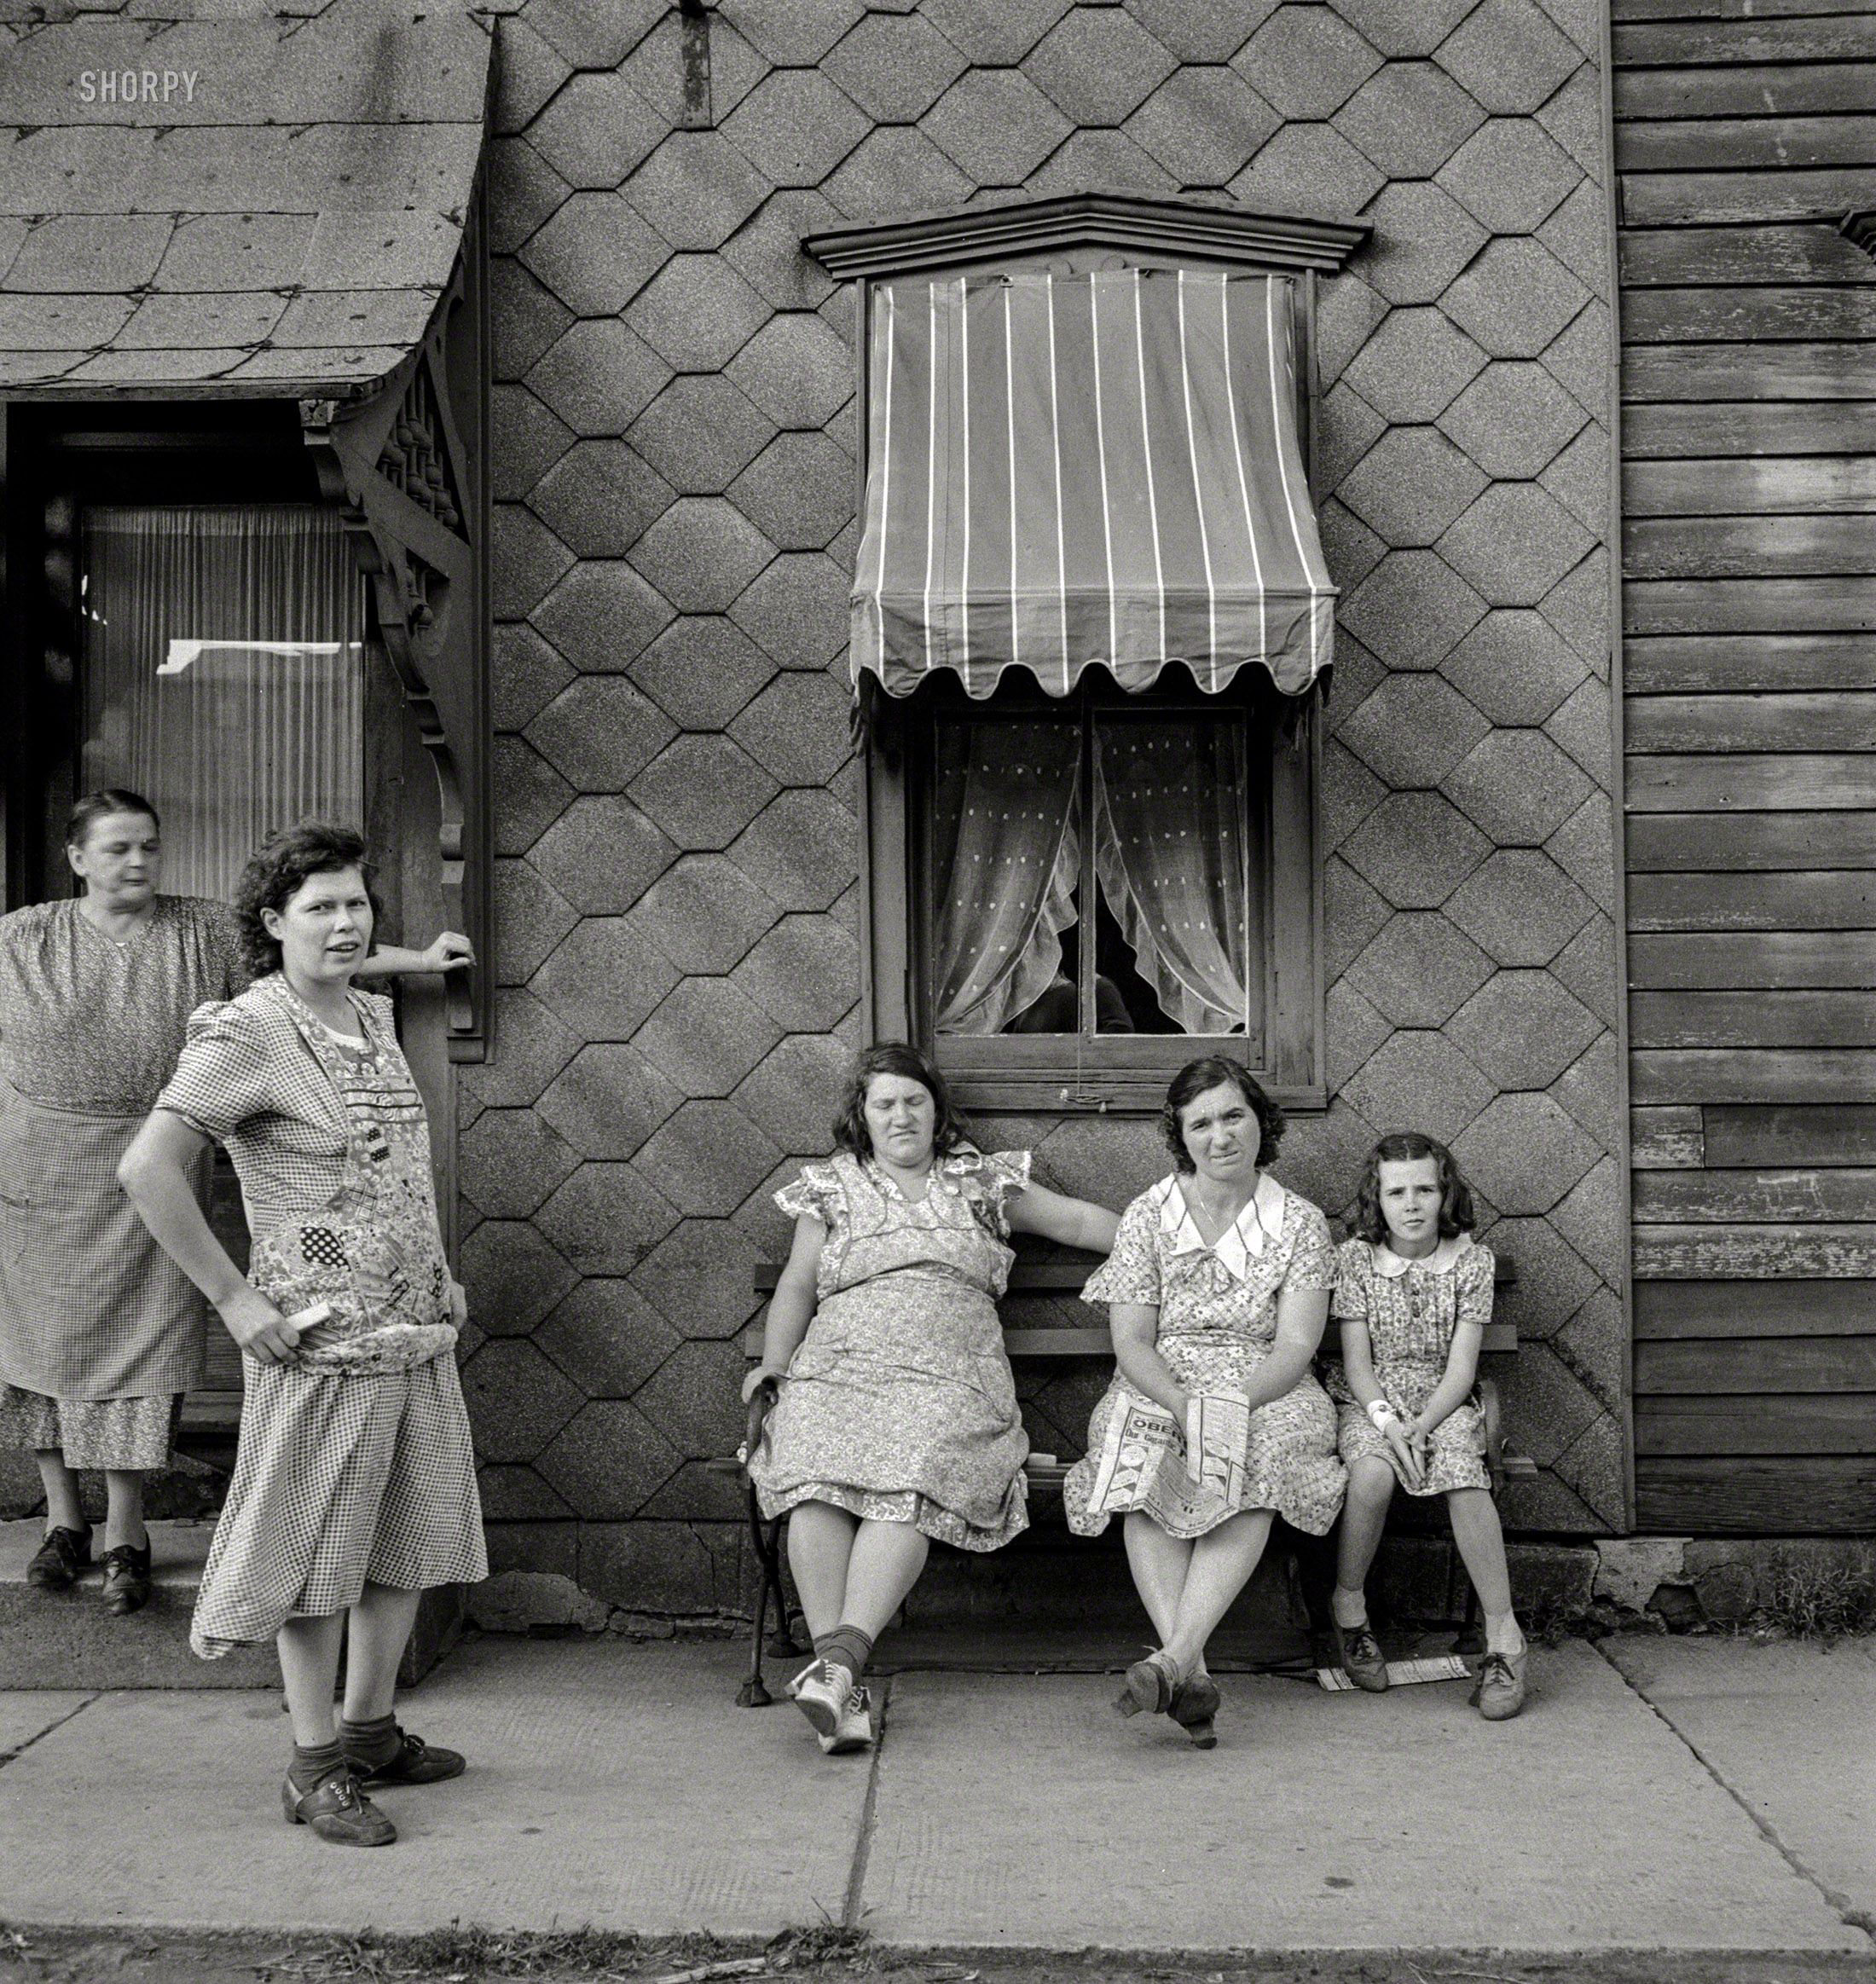 August 1940. "Women in Upper Mauch Chunk, Pennsylvania." Medium-format negative by Jack Delano for the Resettlement Administration. View full size.
&nbsp; &nbsp; &nbsp; &nbsp; Mauch Chunk, a town whose name was "derived from the term Mawsch Unk (Bear Place) in the language of the native Munsee-Lenape Delaware peoples," was renamed Jim Thorpe in honor of the Olympic athlete after his death in 1953. Other aliases include "Switzerland of America" and "Gateway to the Poconos."